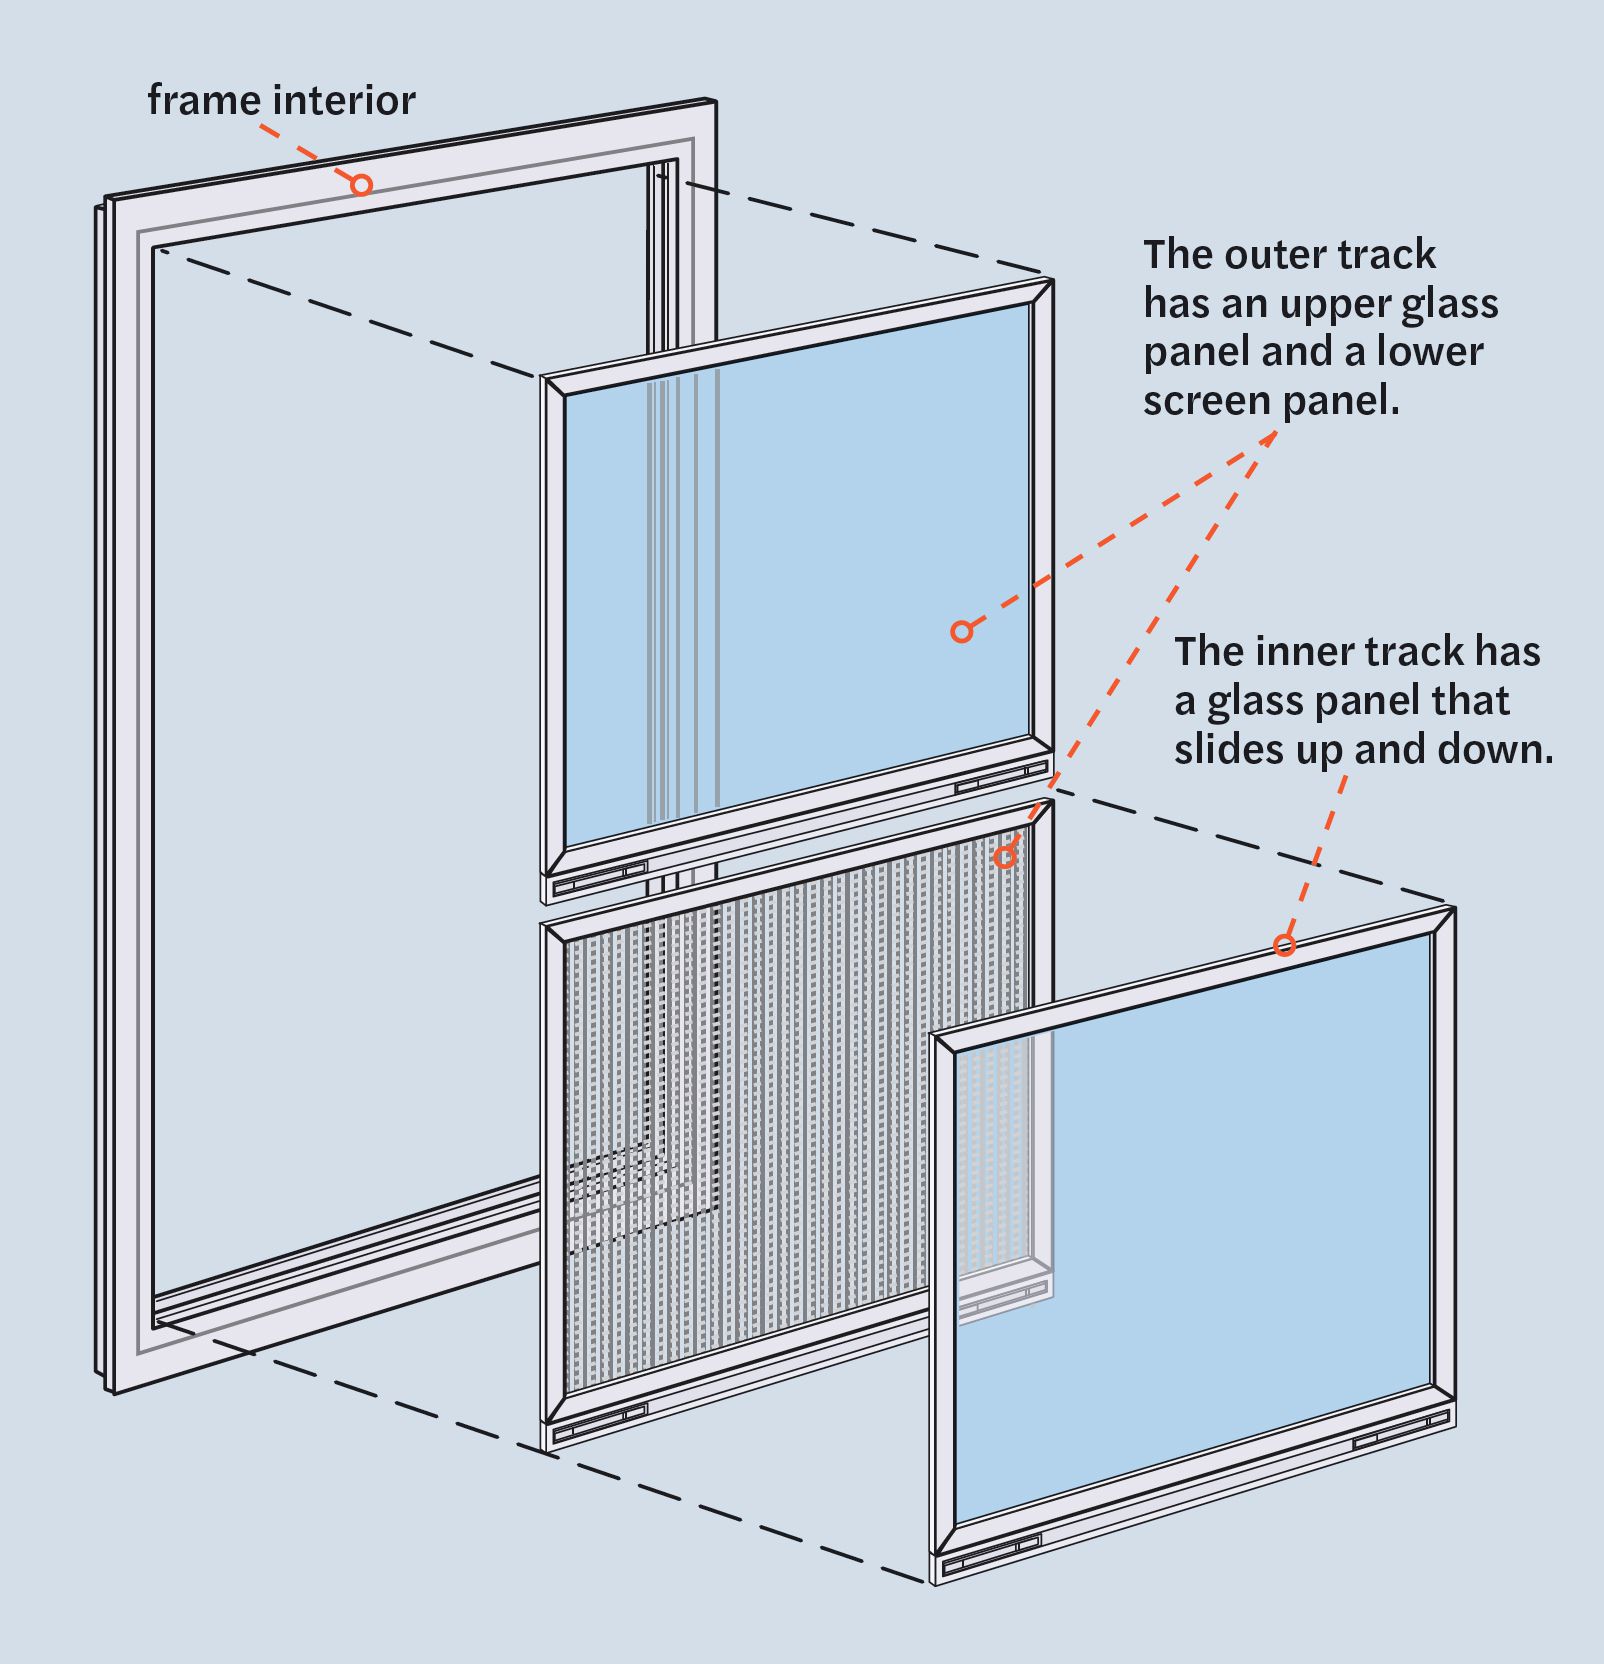 Position the screen frame back into the window opening.
Ensure the frame is aligned properly and fits snugly.